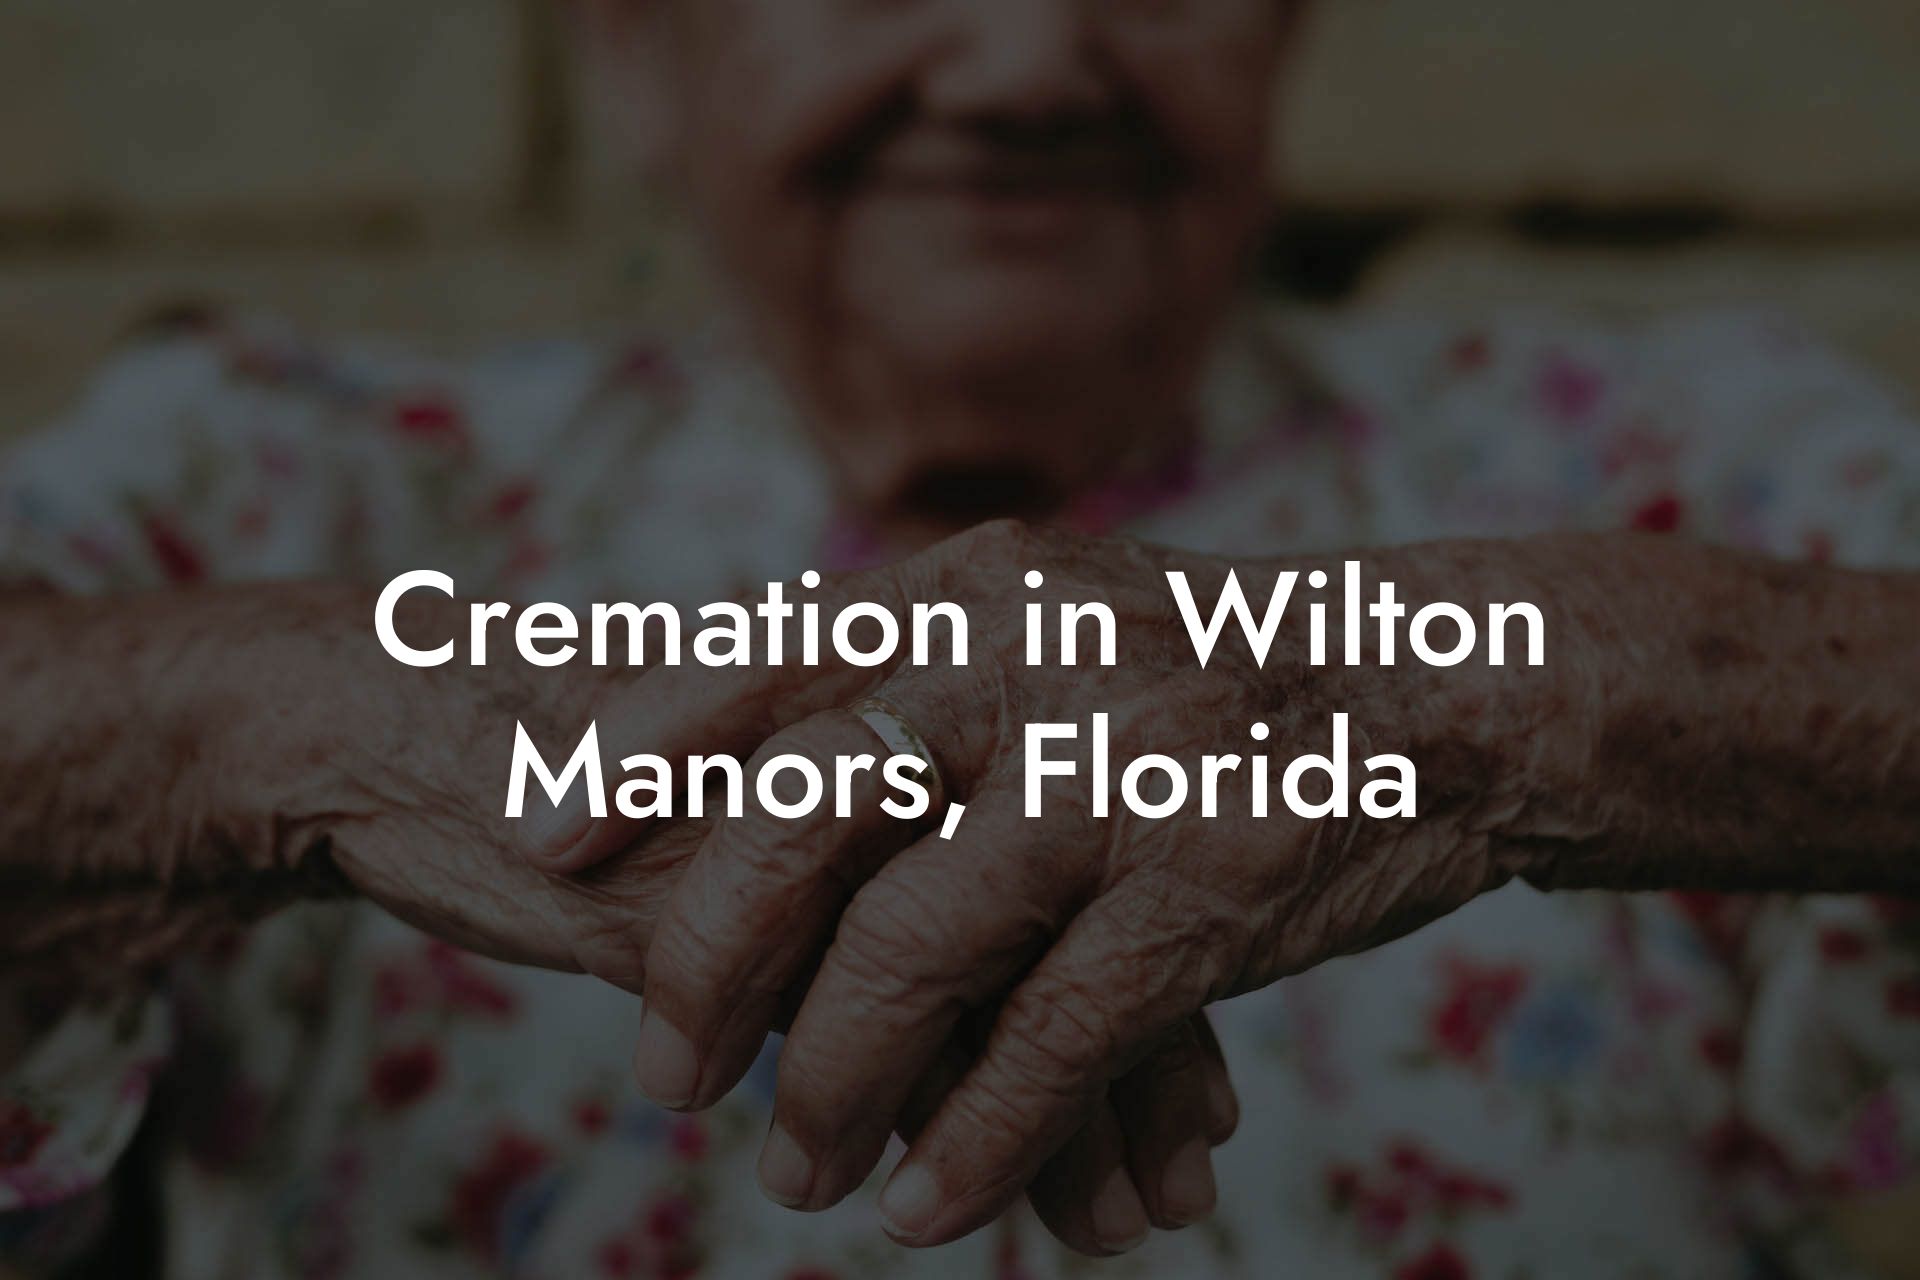 Cremation in Wilton Manors, Florida